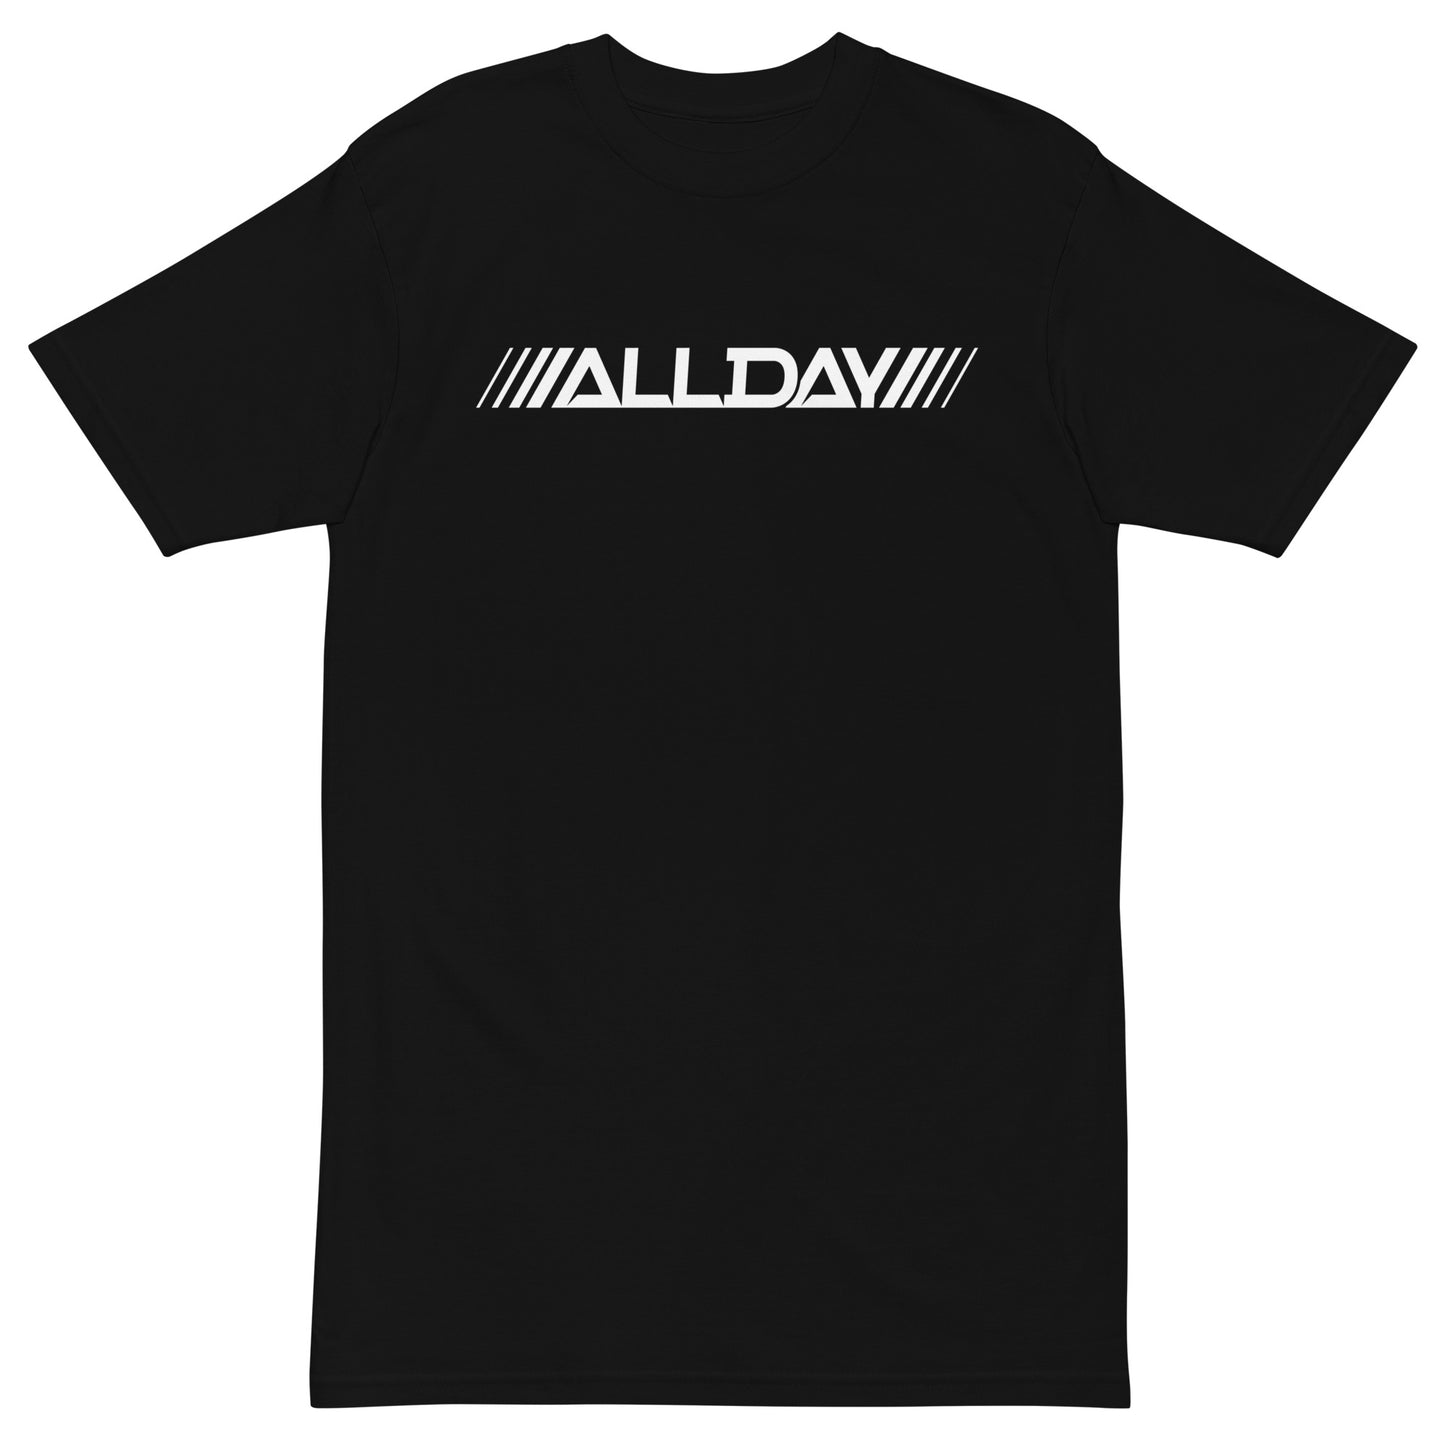 All Day Tee Black